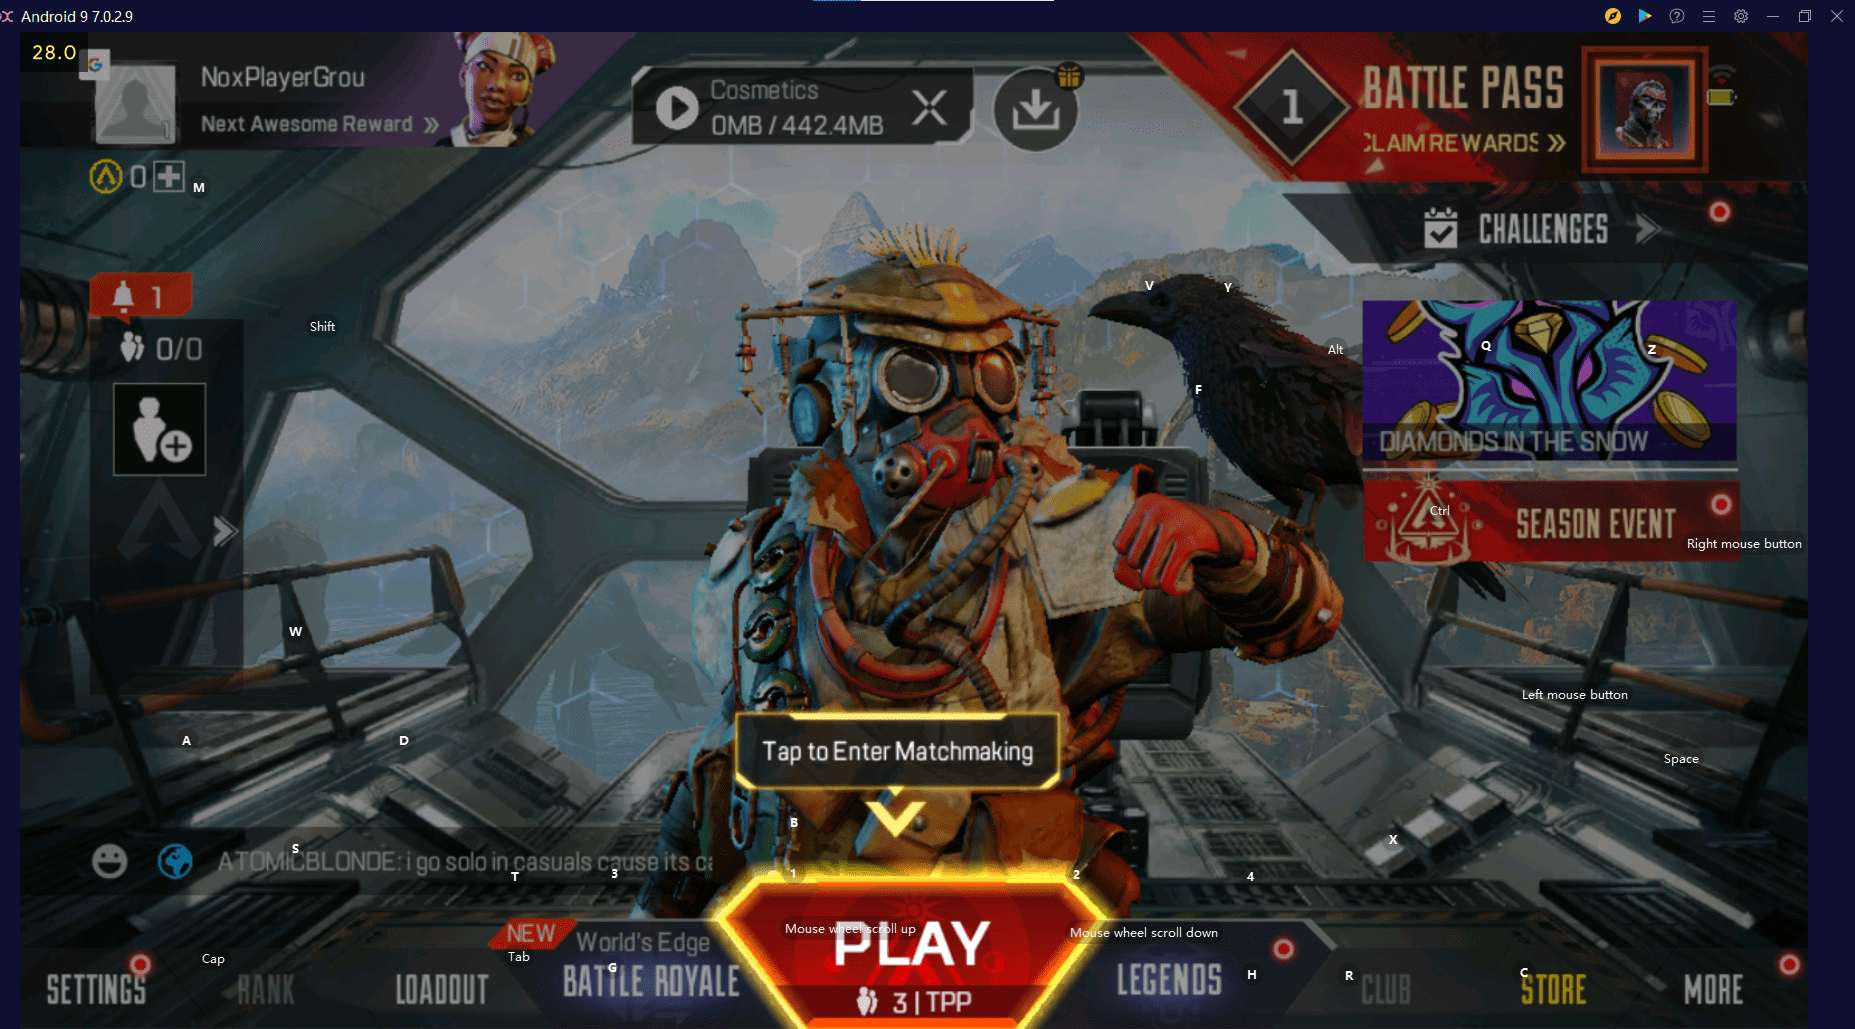 How To DOWNLOAD and PLAY Apex Legends Mobile! 